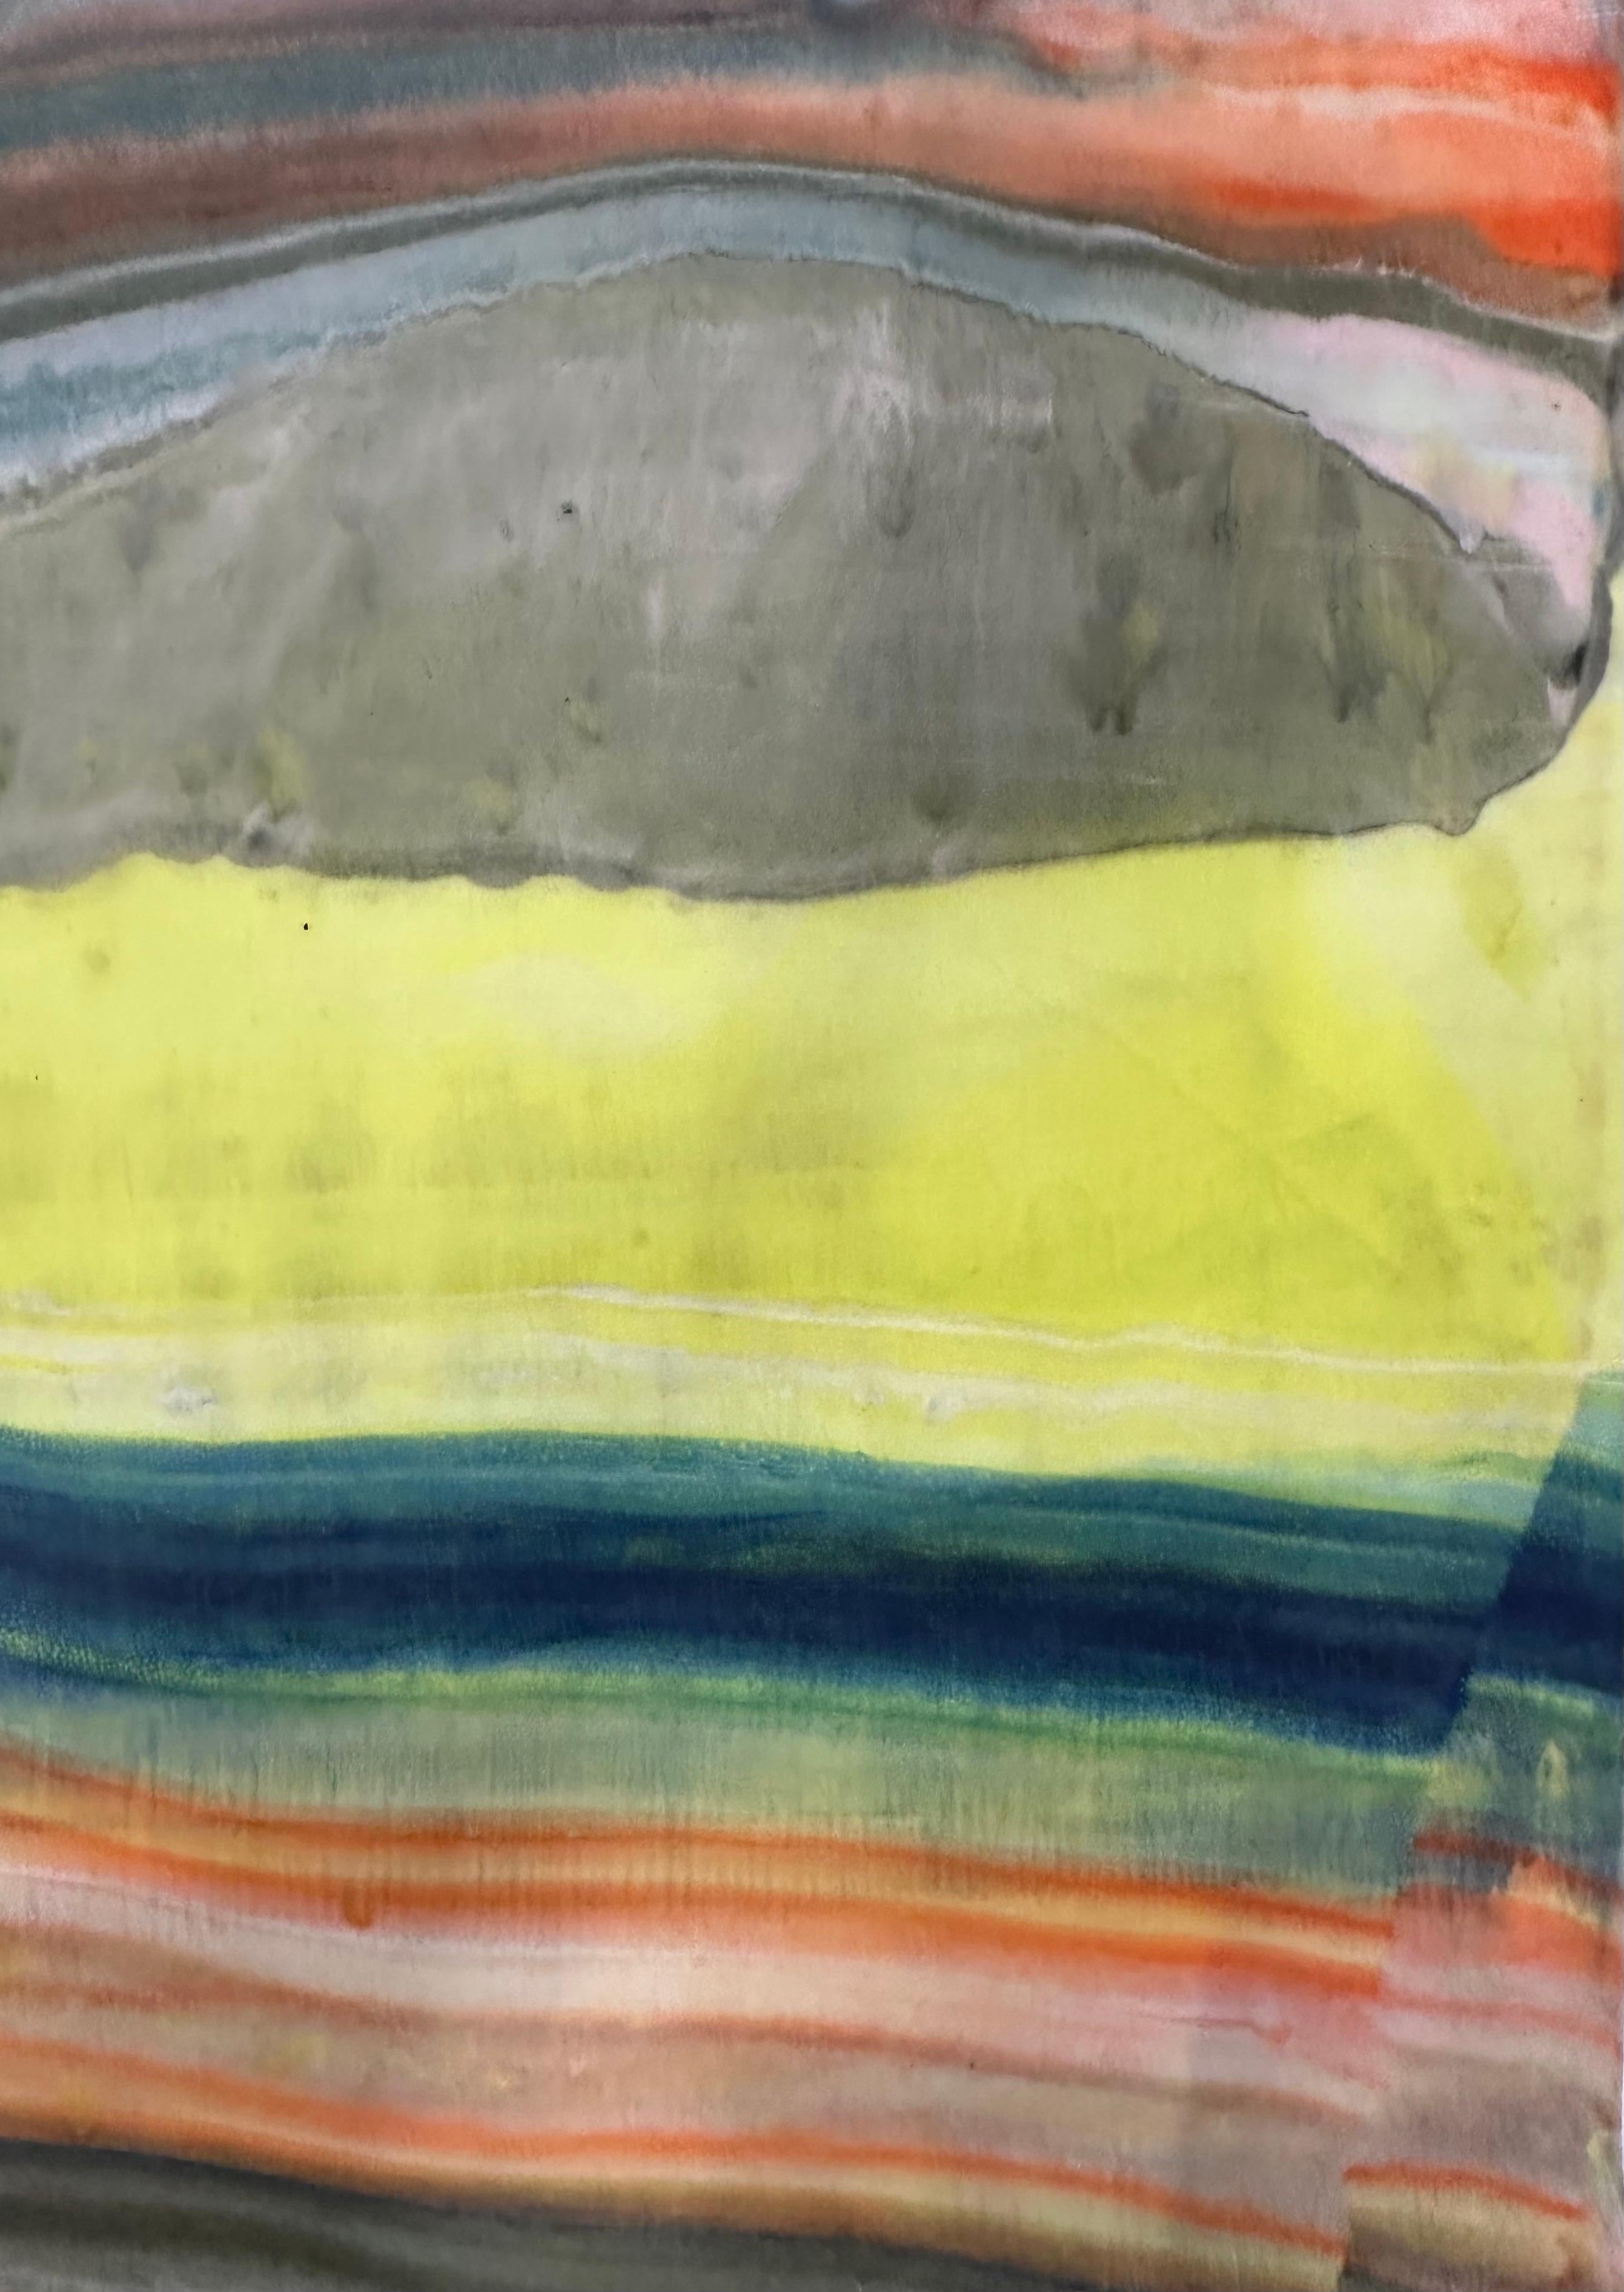 Laura Moriarty's Talking to Rocks 28 is a multicolored encaustic monotype on kozo paper. Layers of pigmented beeswax on lightweight paper create an undulating composition suggesting layers of the earth's crust and geological formations depicted in